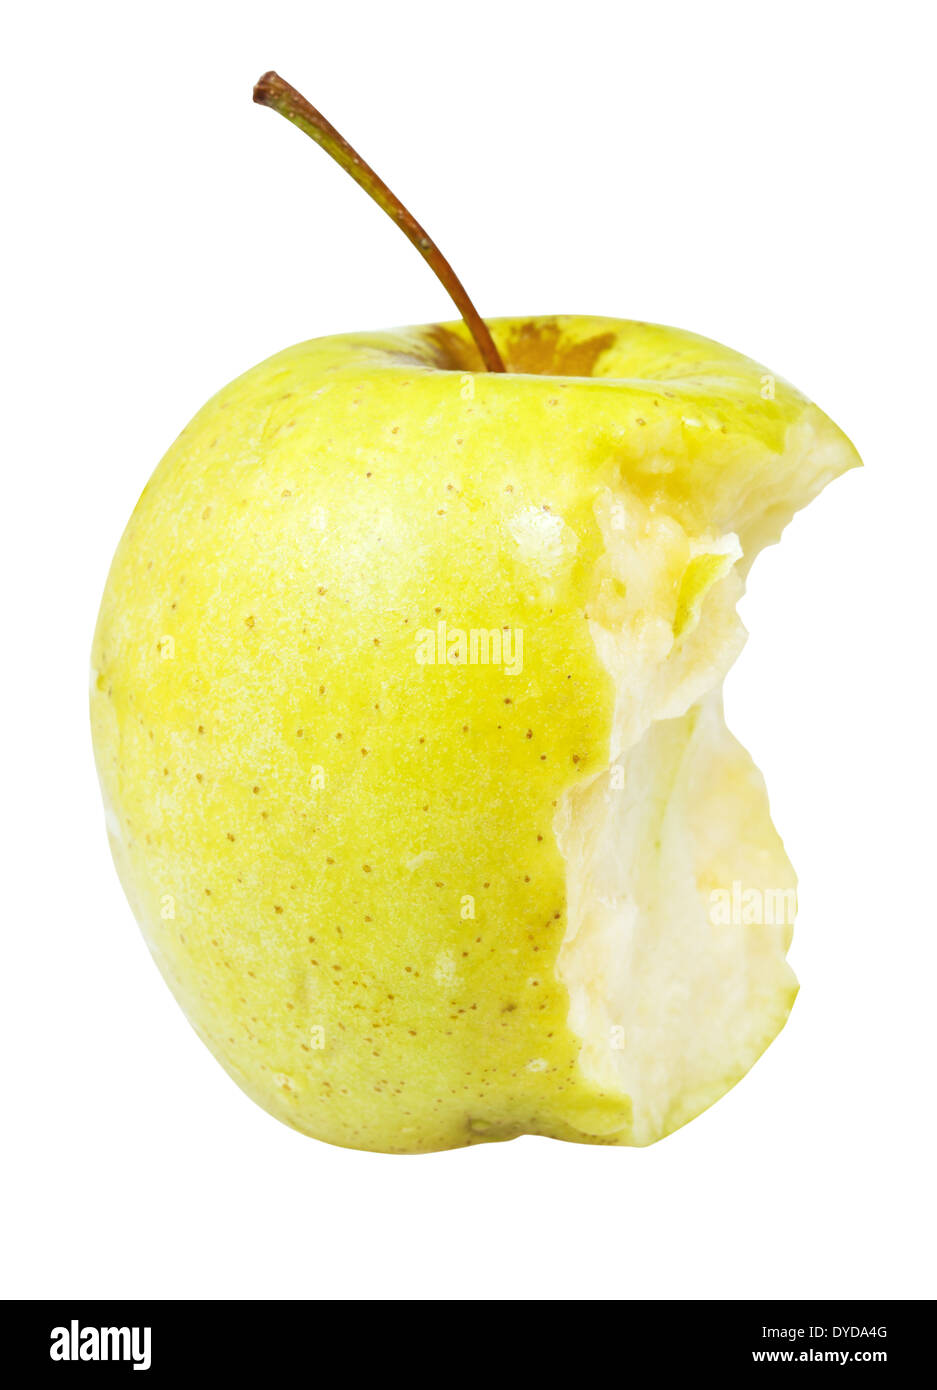 half of golden delicious apple isolated on white background Stock Photo